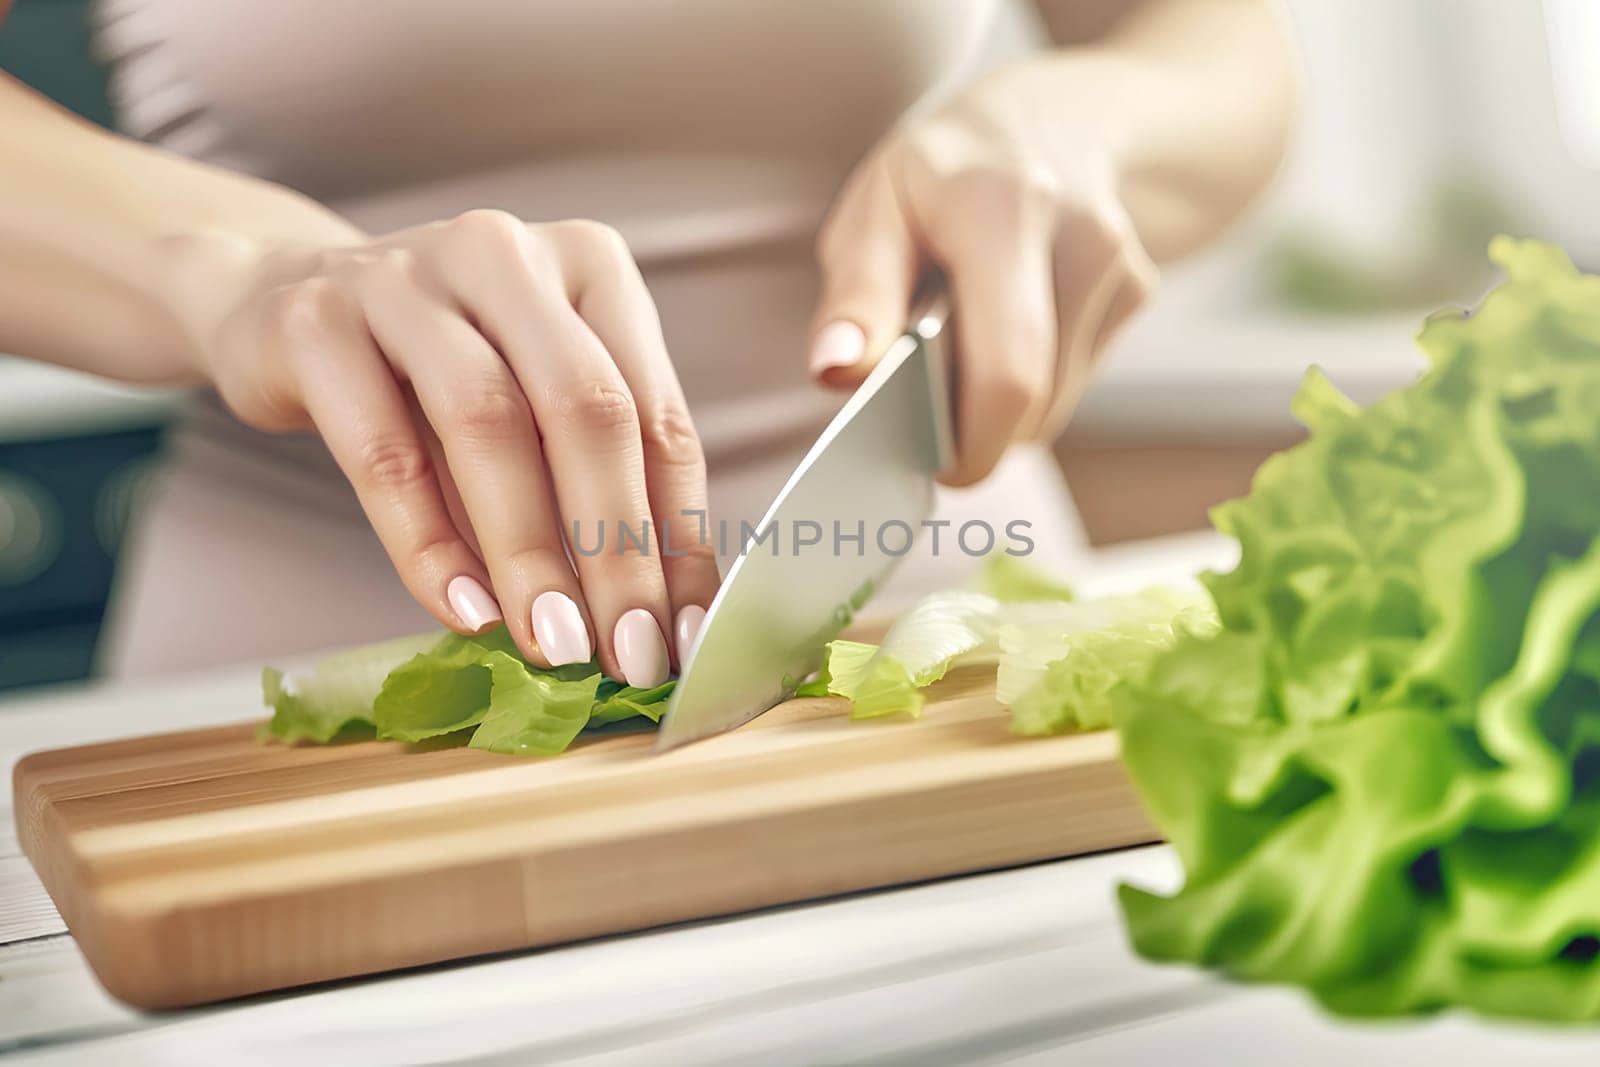 woman cutting green salad leaves on cutting board, close-up